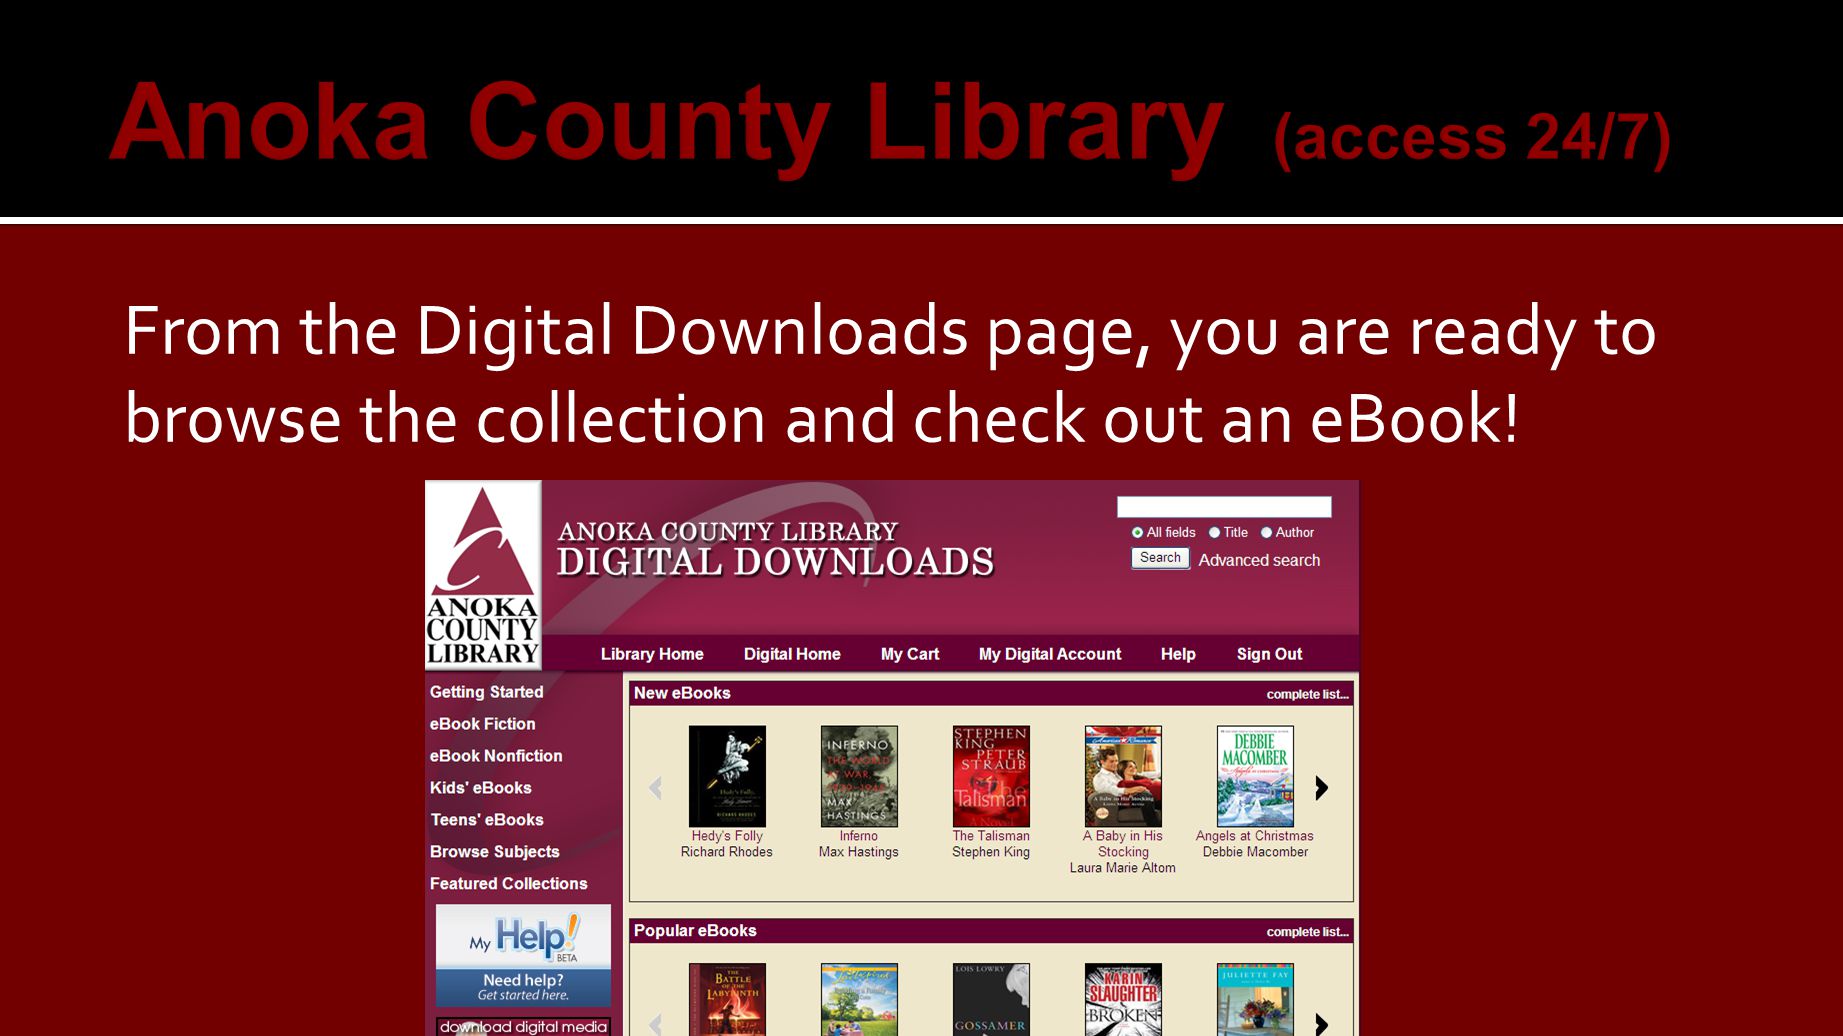 From the Digital Downloads page, you are ready to browse the collection and check out an eBook!